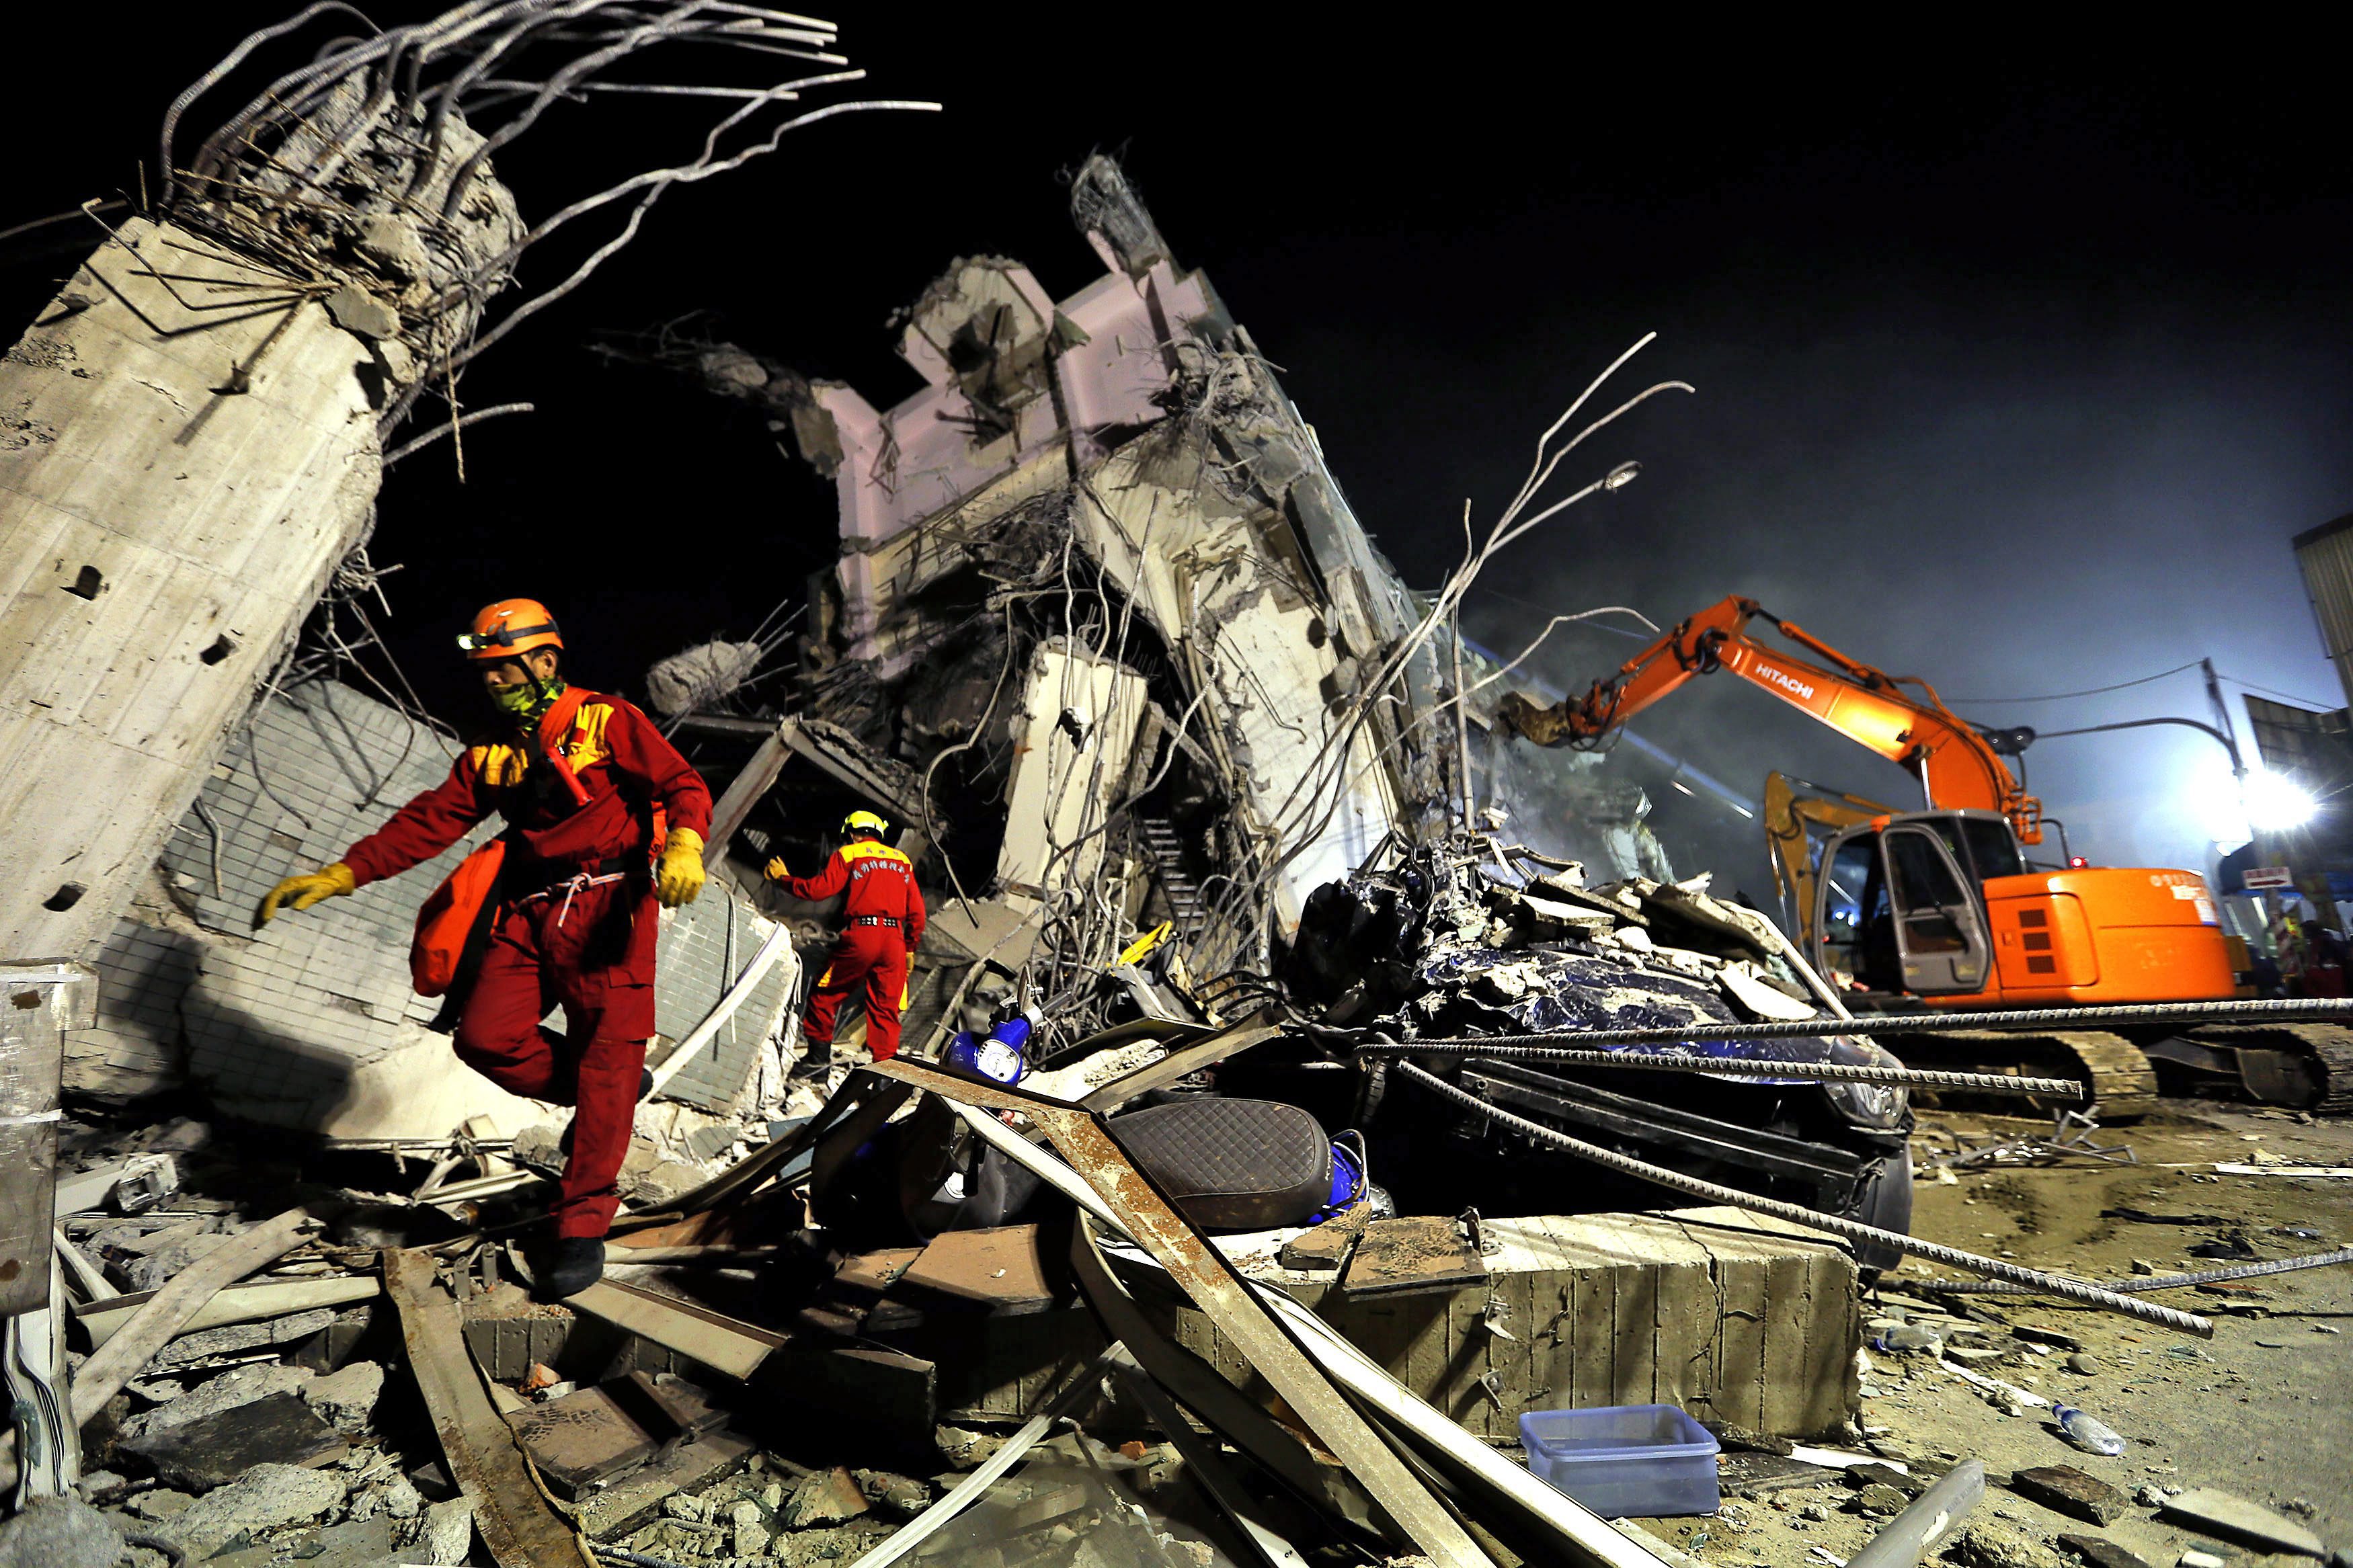 epa05145966 Rescuers remove debris as they continue to search for survivors from a collapsed building following a 6.4 magnitude earthquake struck the area in Tainan City, south Taiwan, Taiwan, 06 February 2016. At least eight people, including an infant, were killed and hundreds injured when a 6.4-magnitude earthquake struck southern Taiwan early 06 February 2016, authorities said. A 17-storey apartment building collapsed in Tainan City's Yungkang district. It was said to be home to about 250 people in 96 households, according to the Central Emergency Operation Center. EPA/RITCHIE B. TONGO